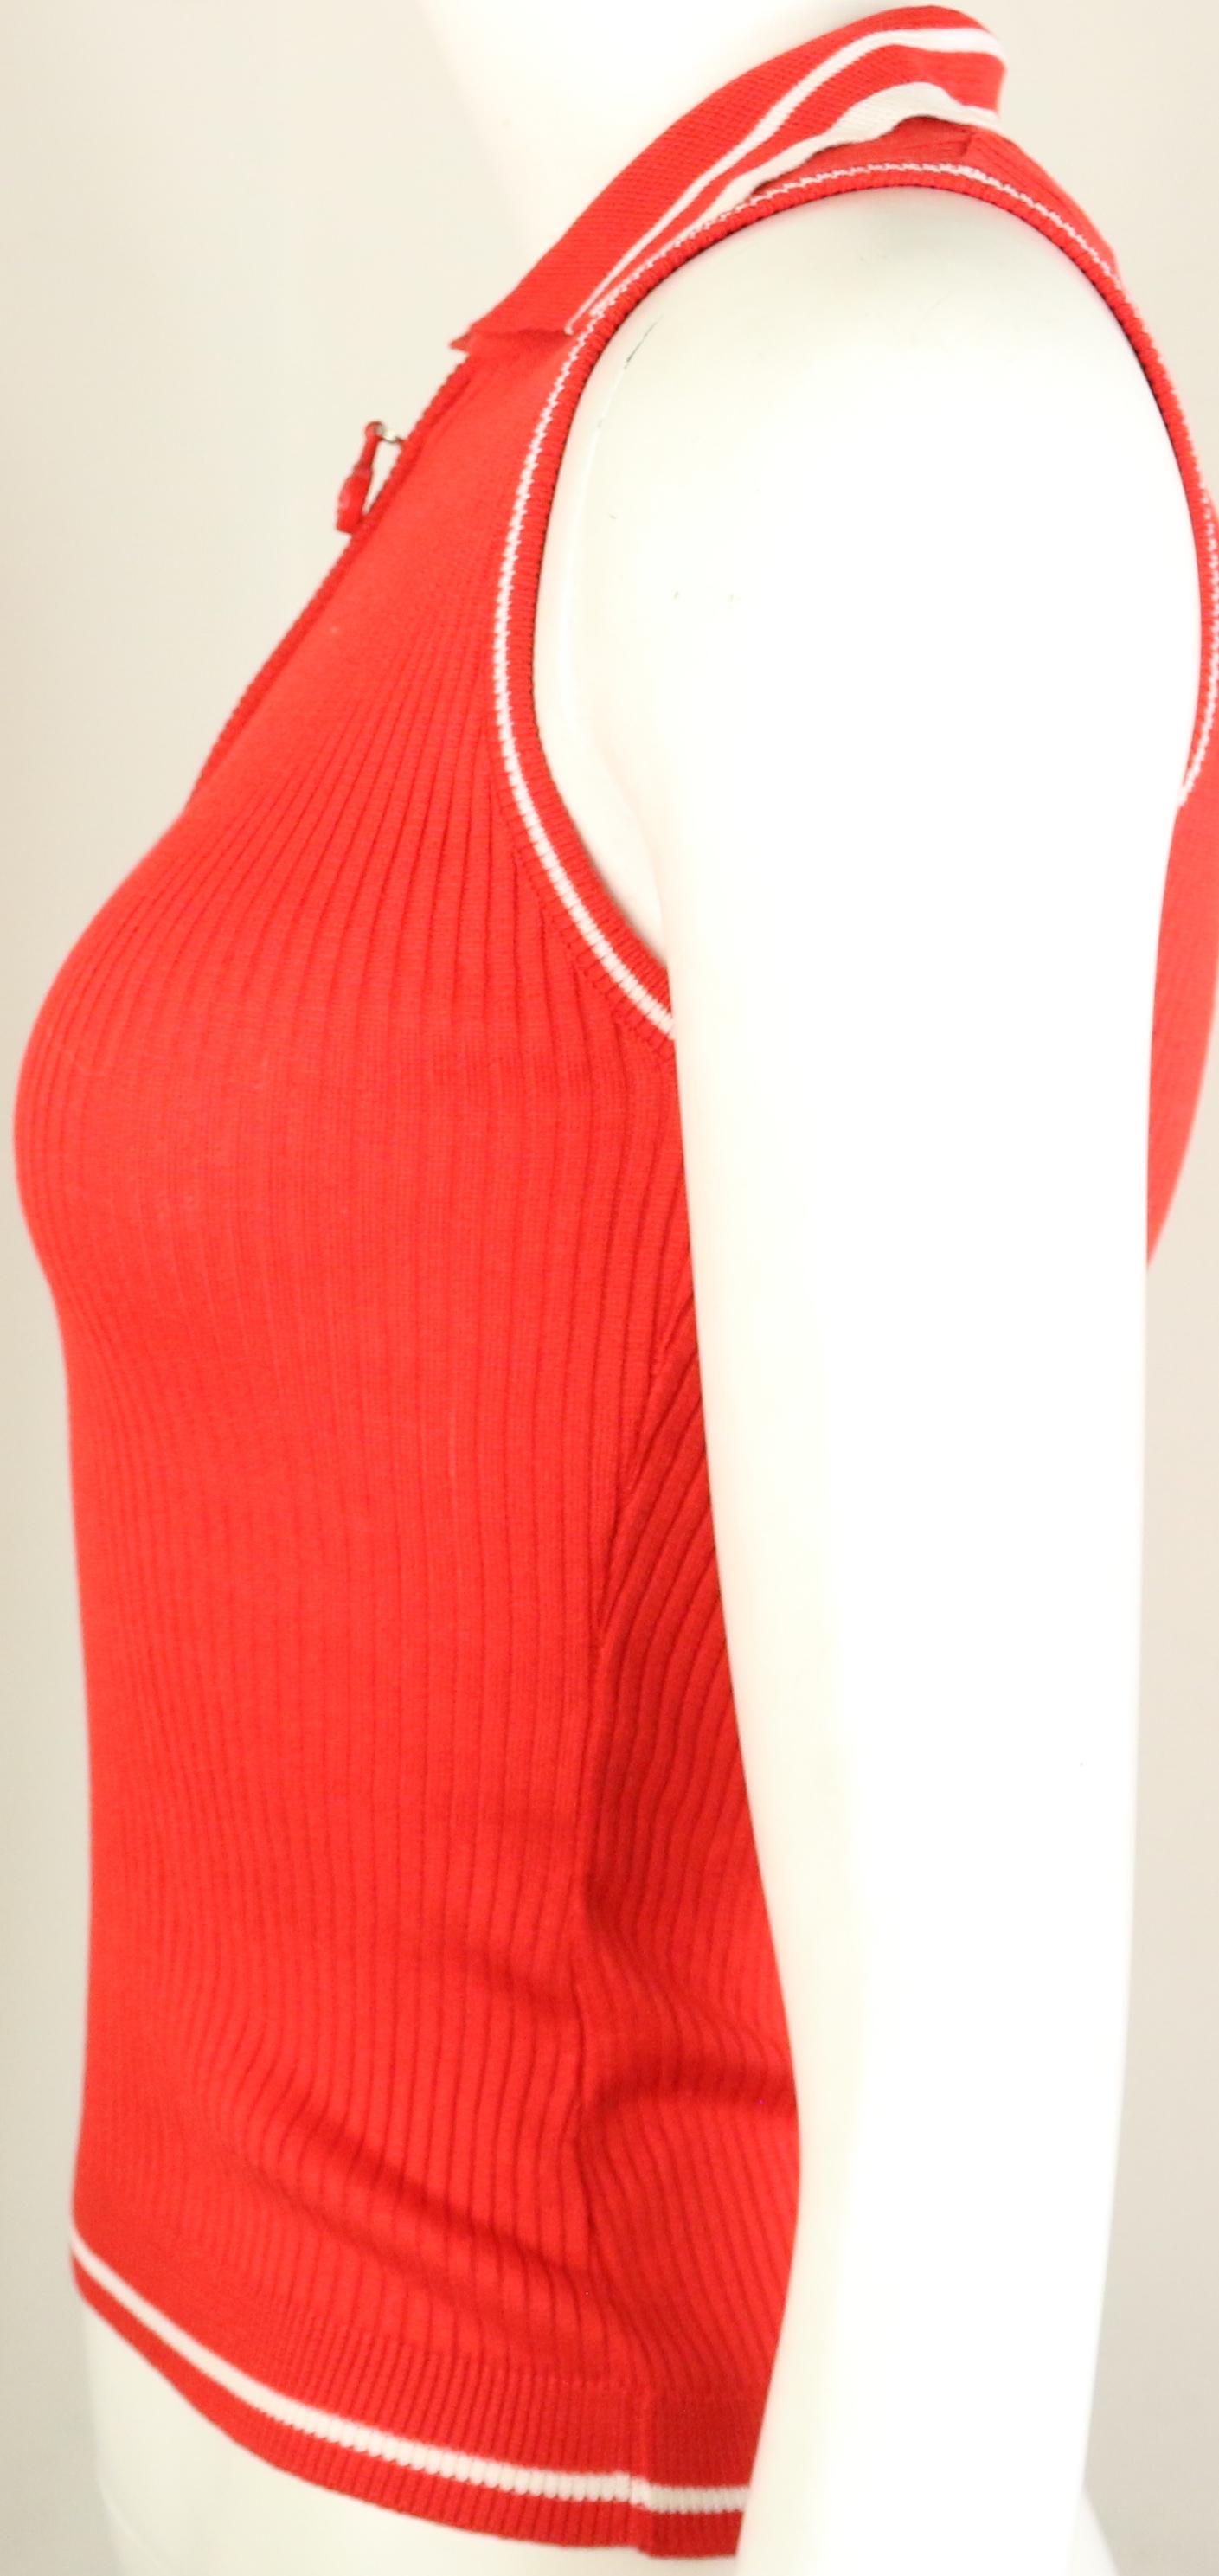 Gianni Versace Couture Red and White Knitted Sleeveless Top and Cardigan Twinset For Sale 5